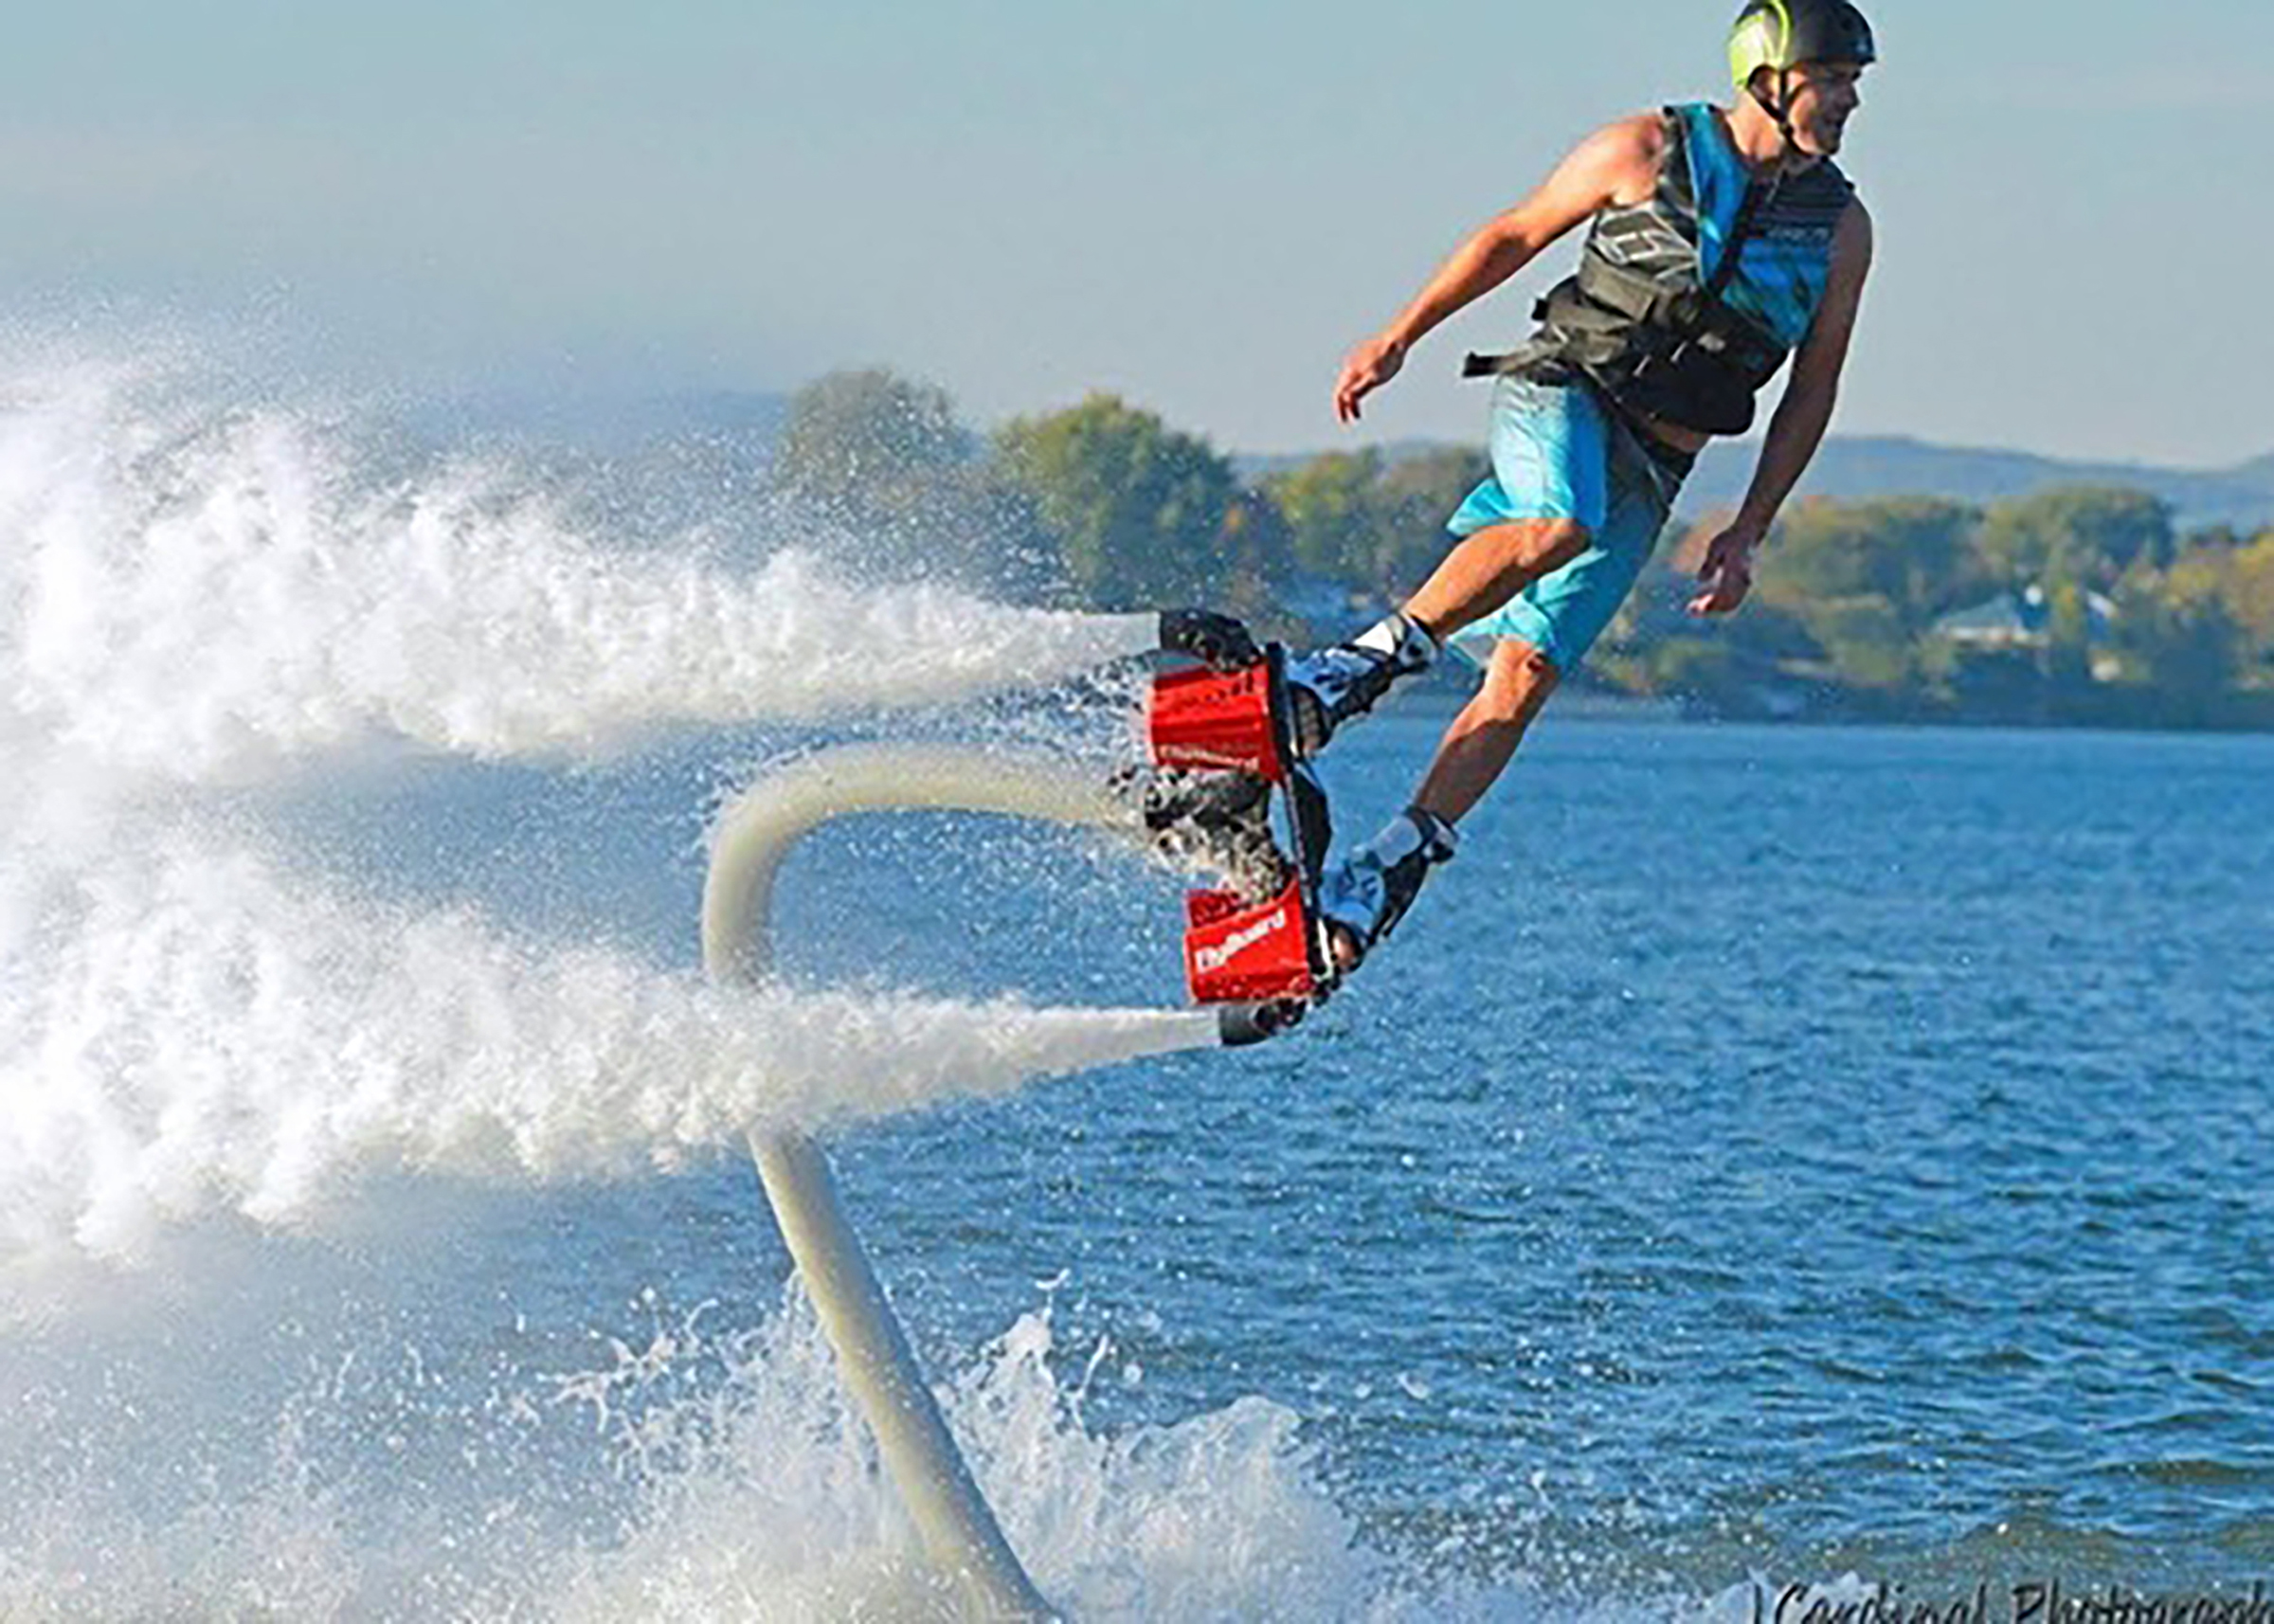 Someone at Austin Flyboard